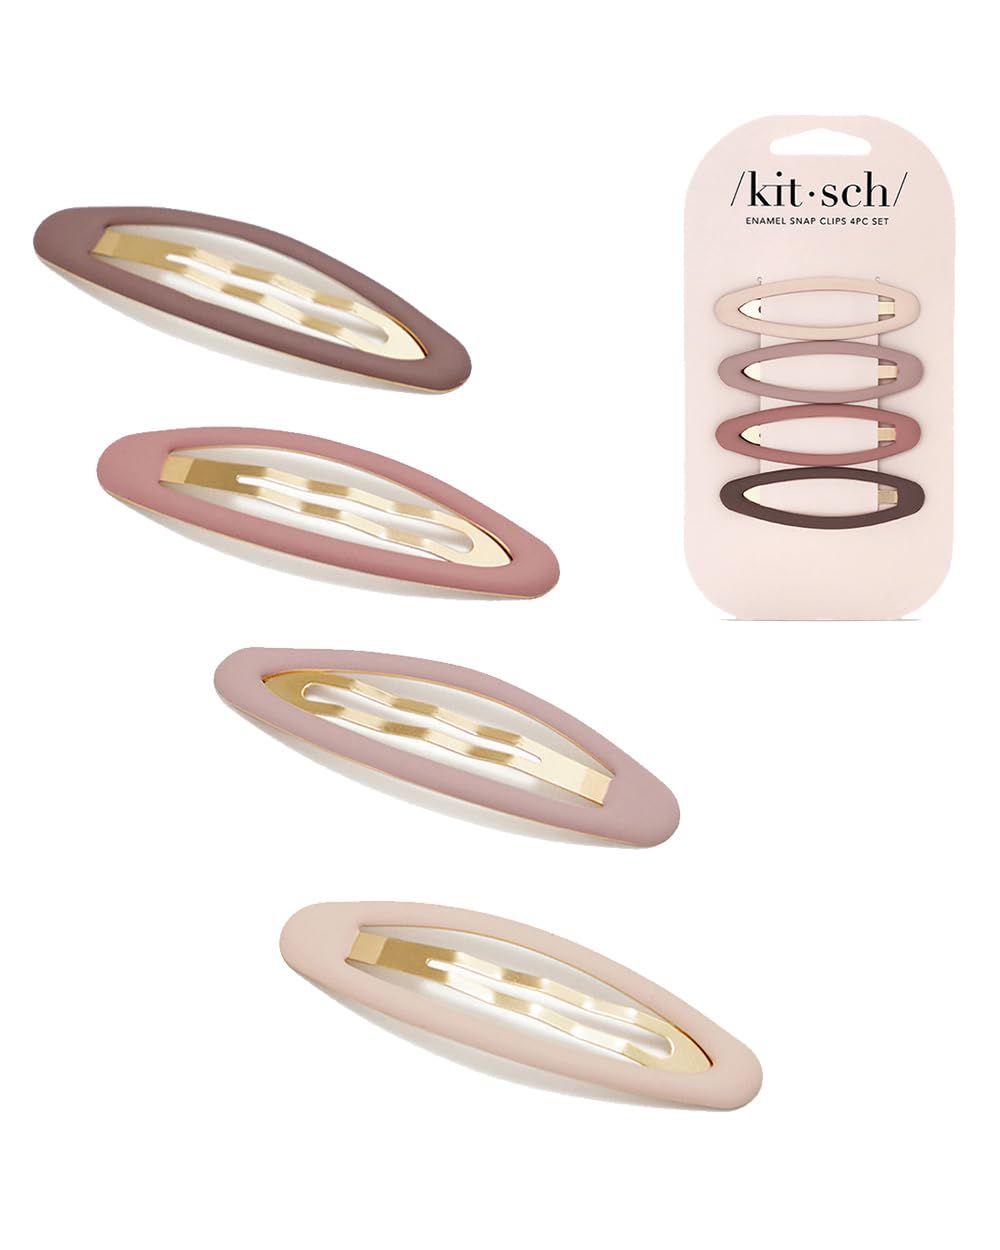 Kitsch Enamel Matte Snap Clips for Hair - Snap Hair Barettes for Thin Hair | Hair Snap Clips for ... | Amazon (US)